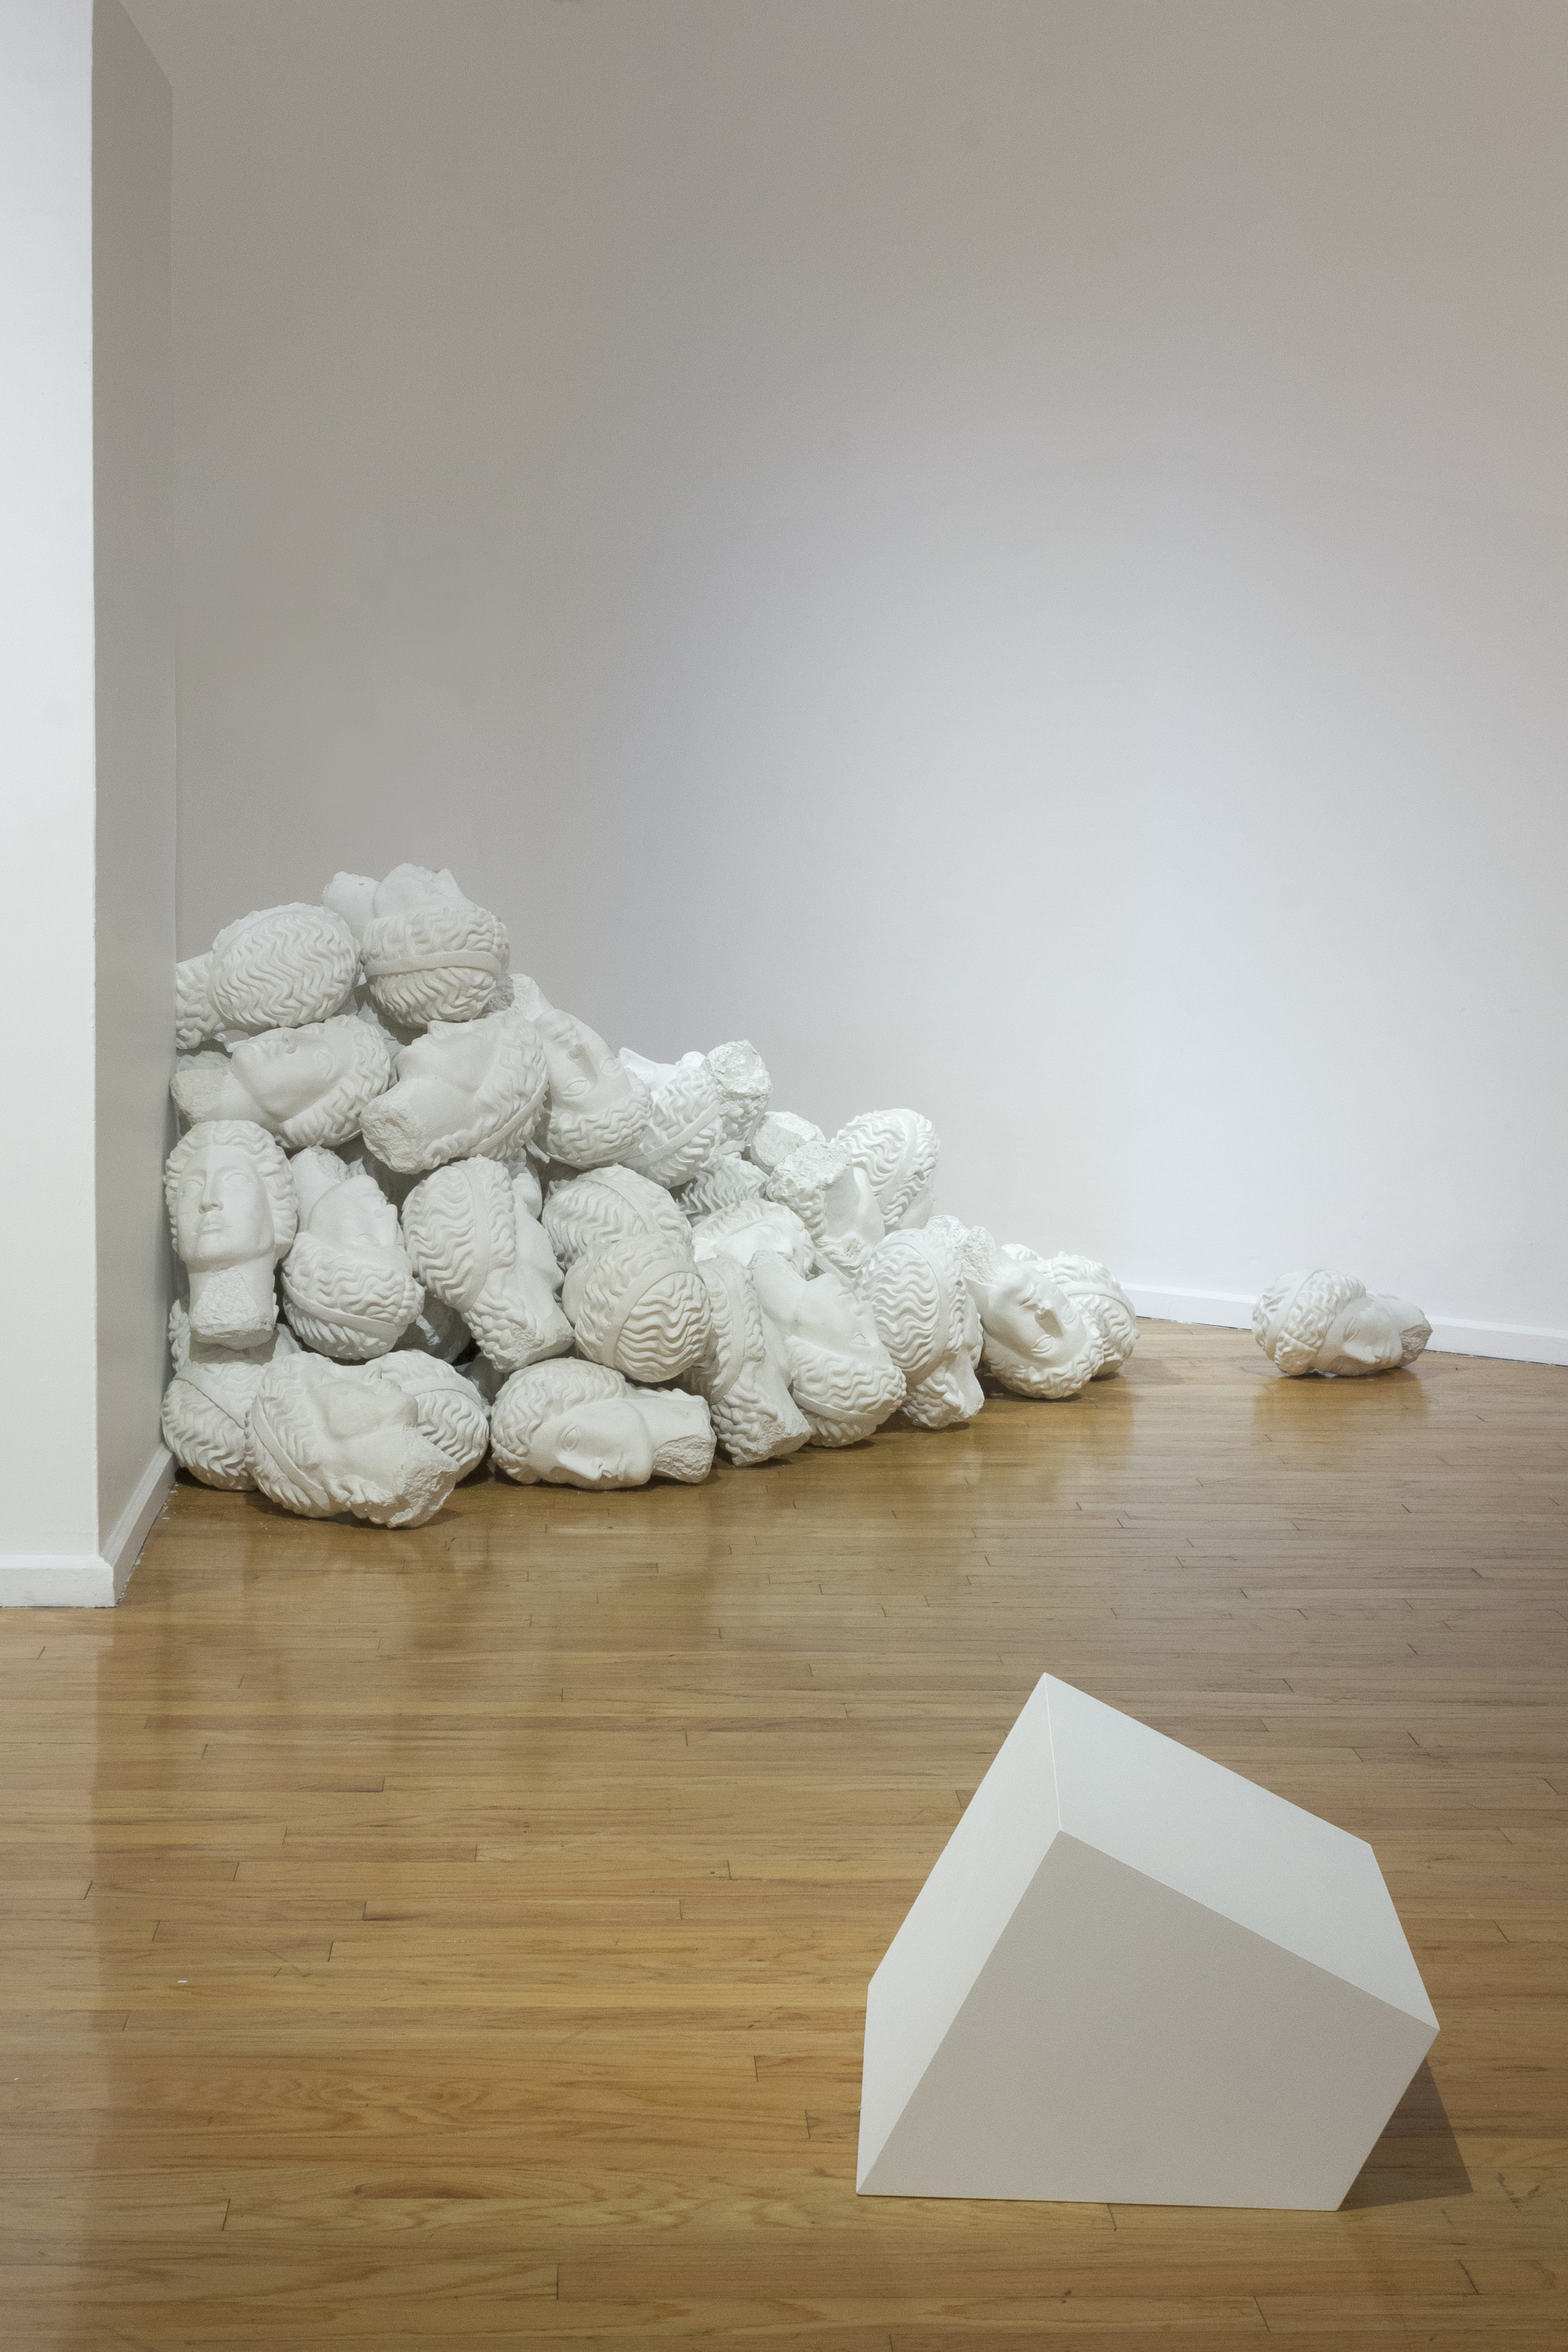 A pile of sculptural heads lies in a corner in the exhibition curated by Paulina Ascencio